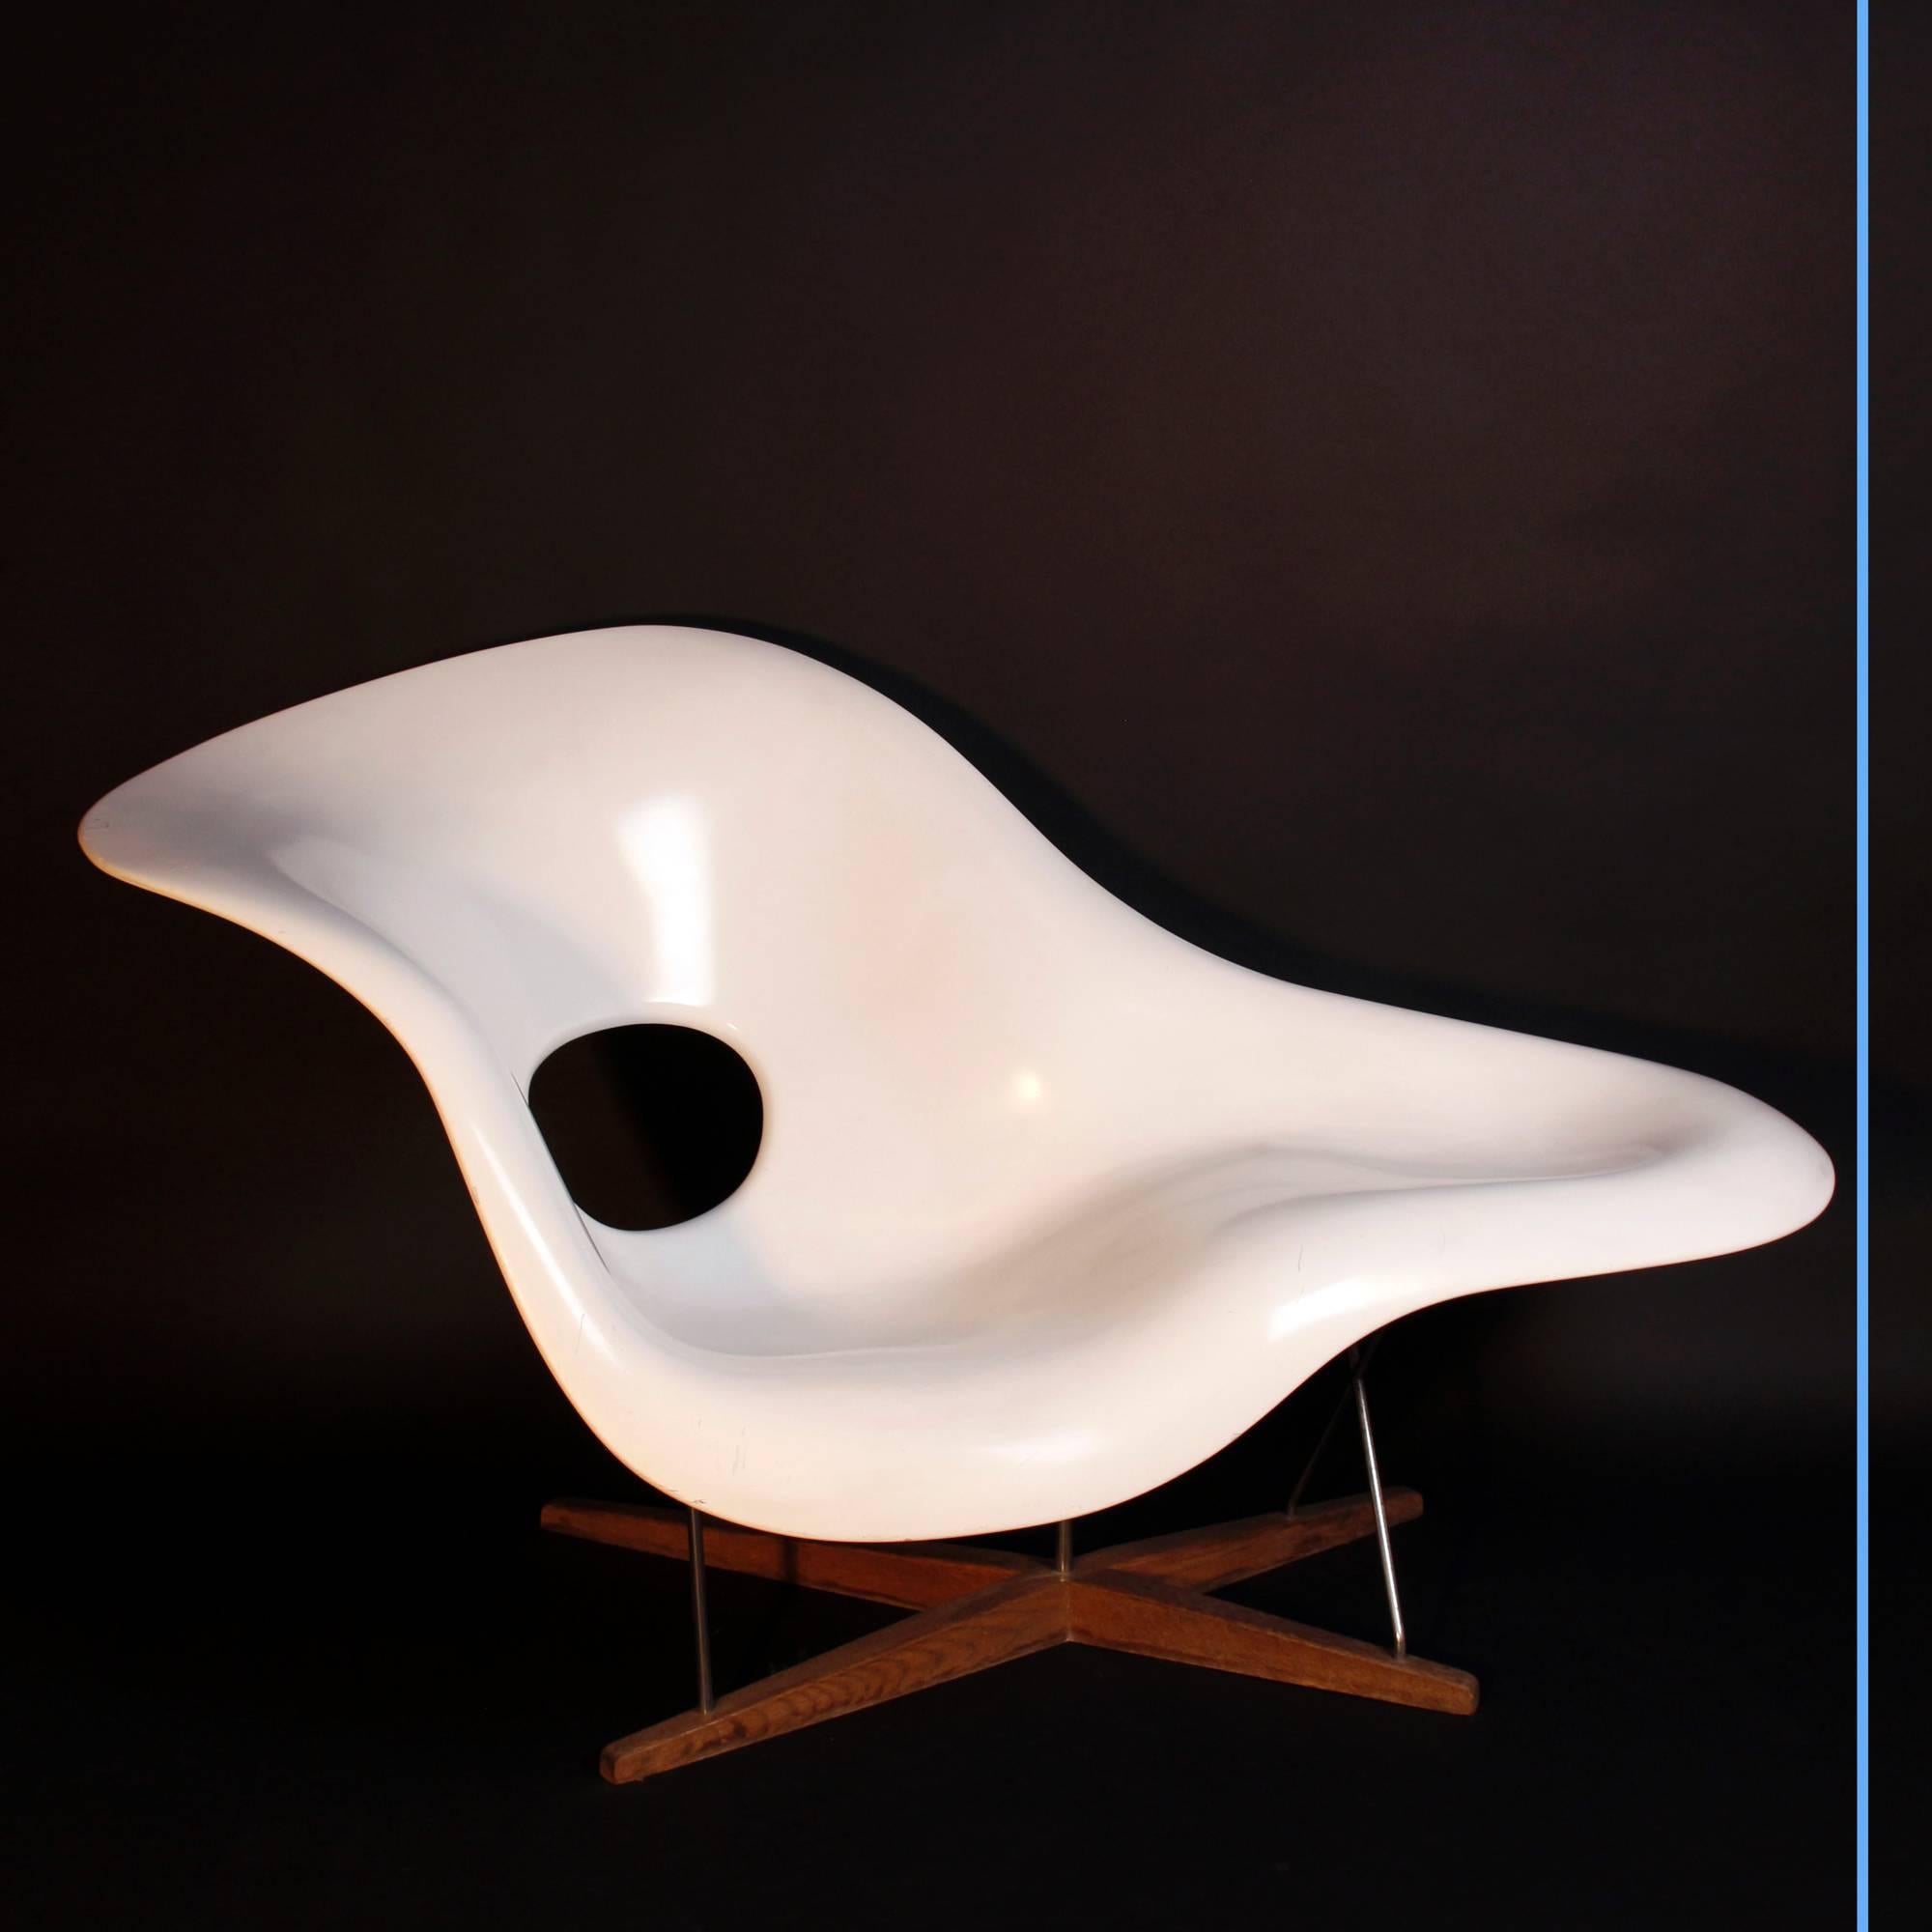 Charles Eames (1907-1978).
La Chaise.
Chaise longue.
Hard rubber foam, plastic, wood and metal,
1948.
Measures: H. 82.5 - L. 149.8 - D. 87 cm.

This chaise longue was inspired by Gaston Lachaise's 1927 sculpture Reclining Nude and nicknamed